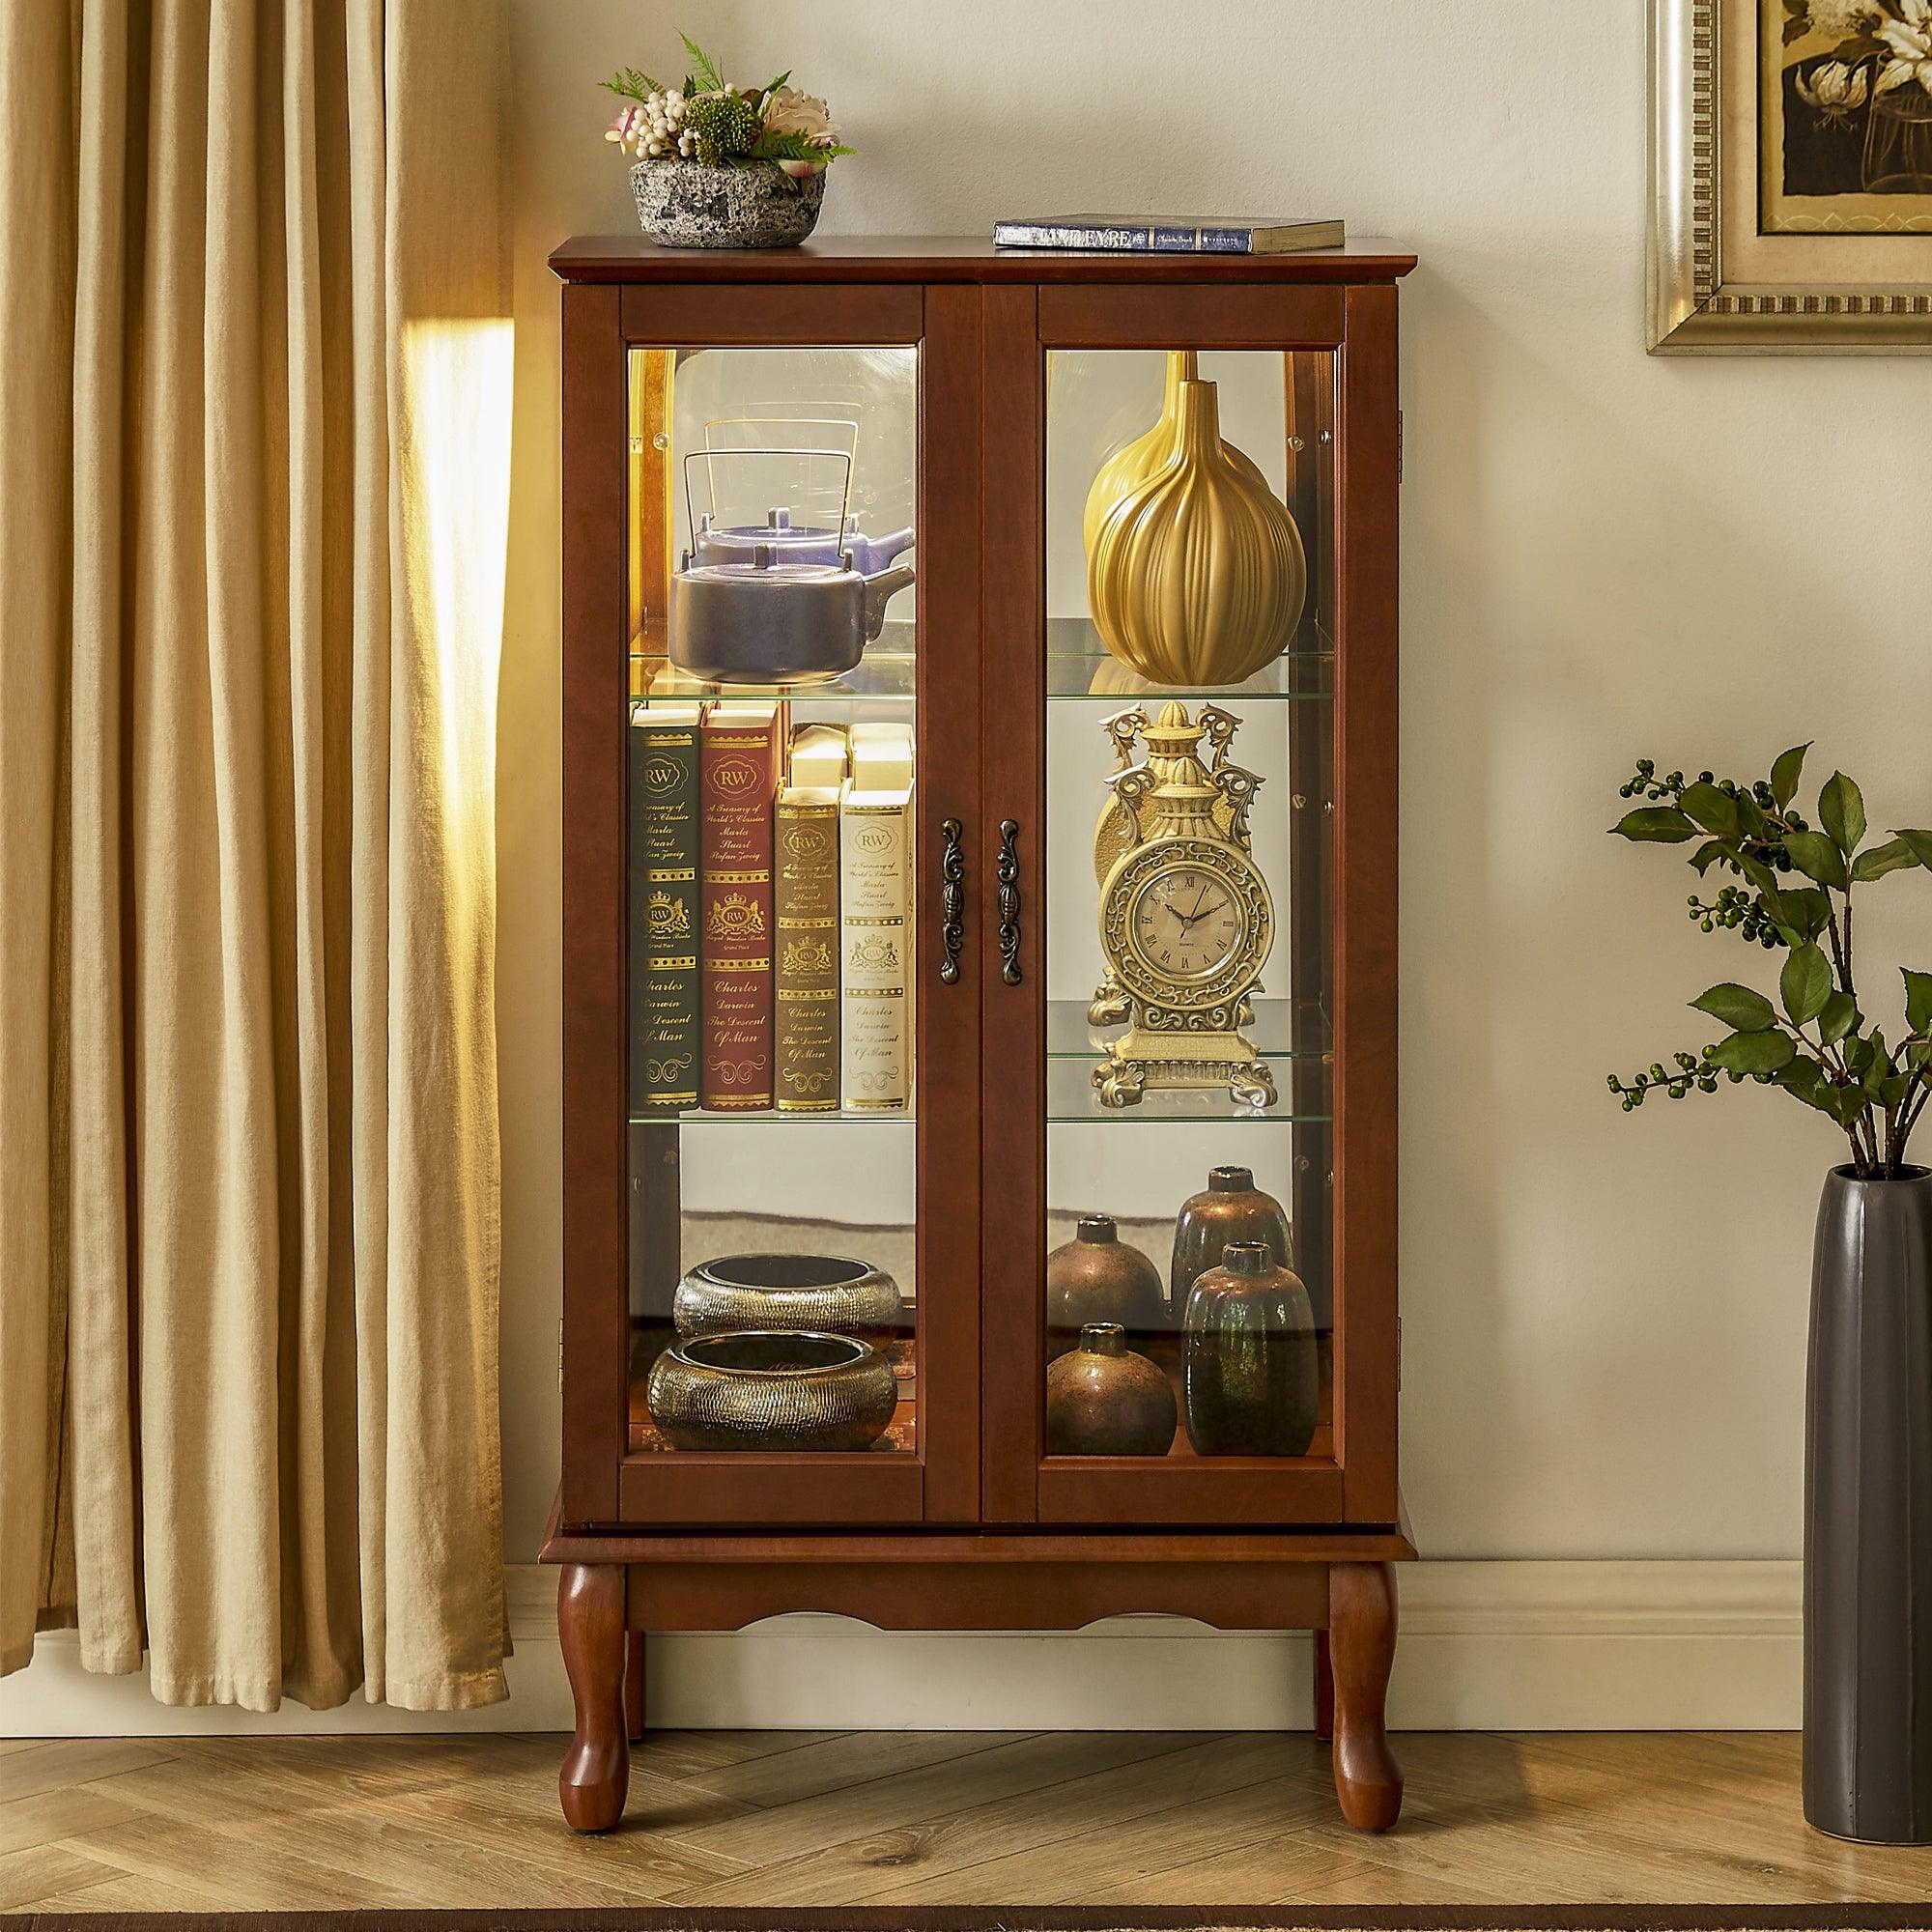 🆓🚛 3 Tier Curio Cabinet Lighted Diapaly Cabinet With Adjustable Shelves & Mirrored Back Panel, Tempered Glass Doors, Walnut, (E26 Light Bulb Not Included)